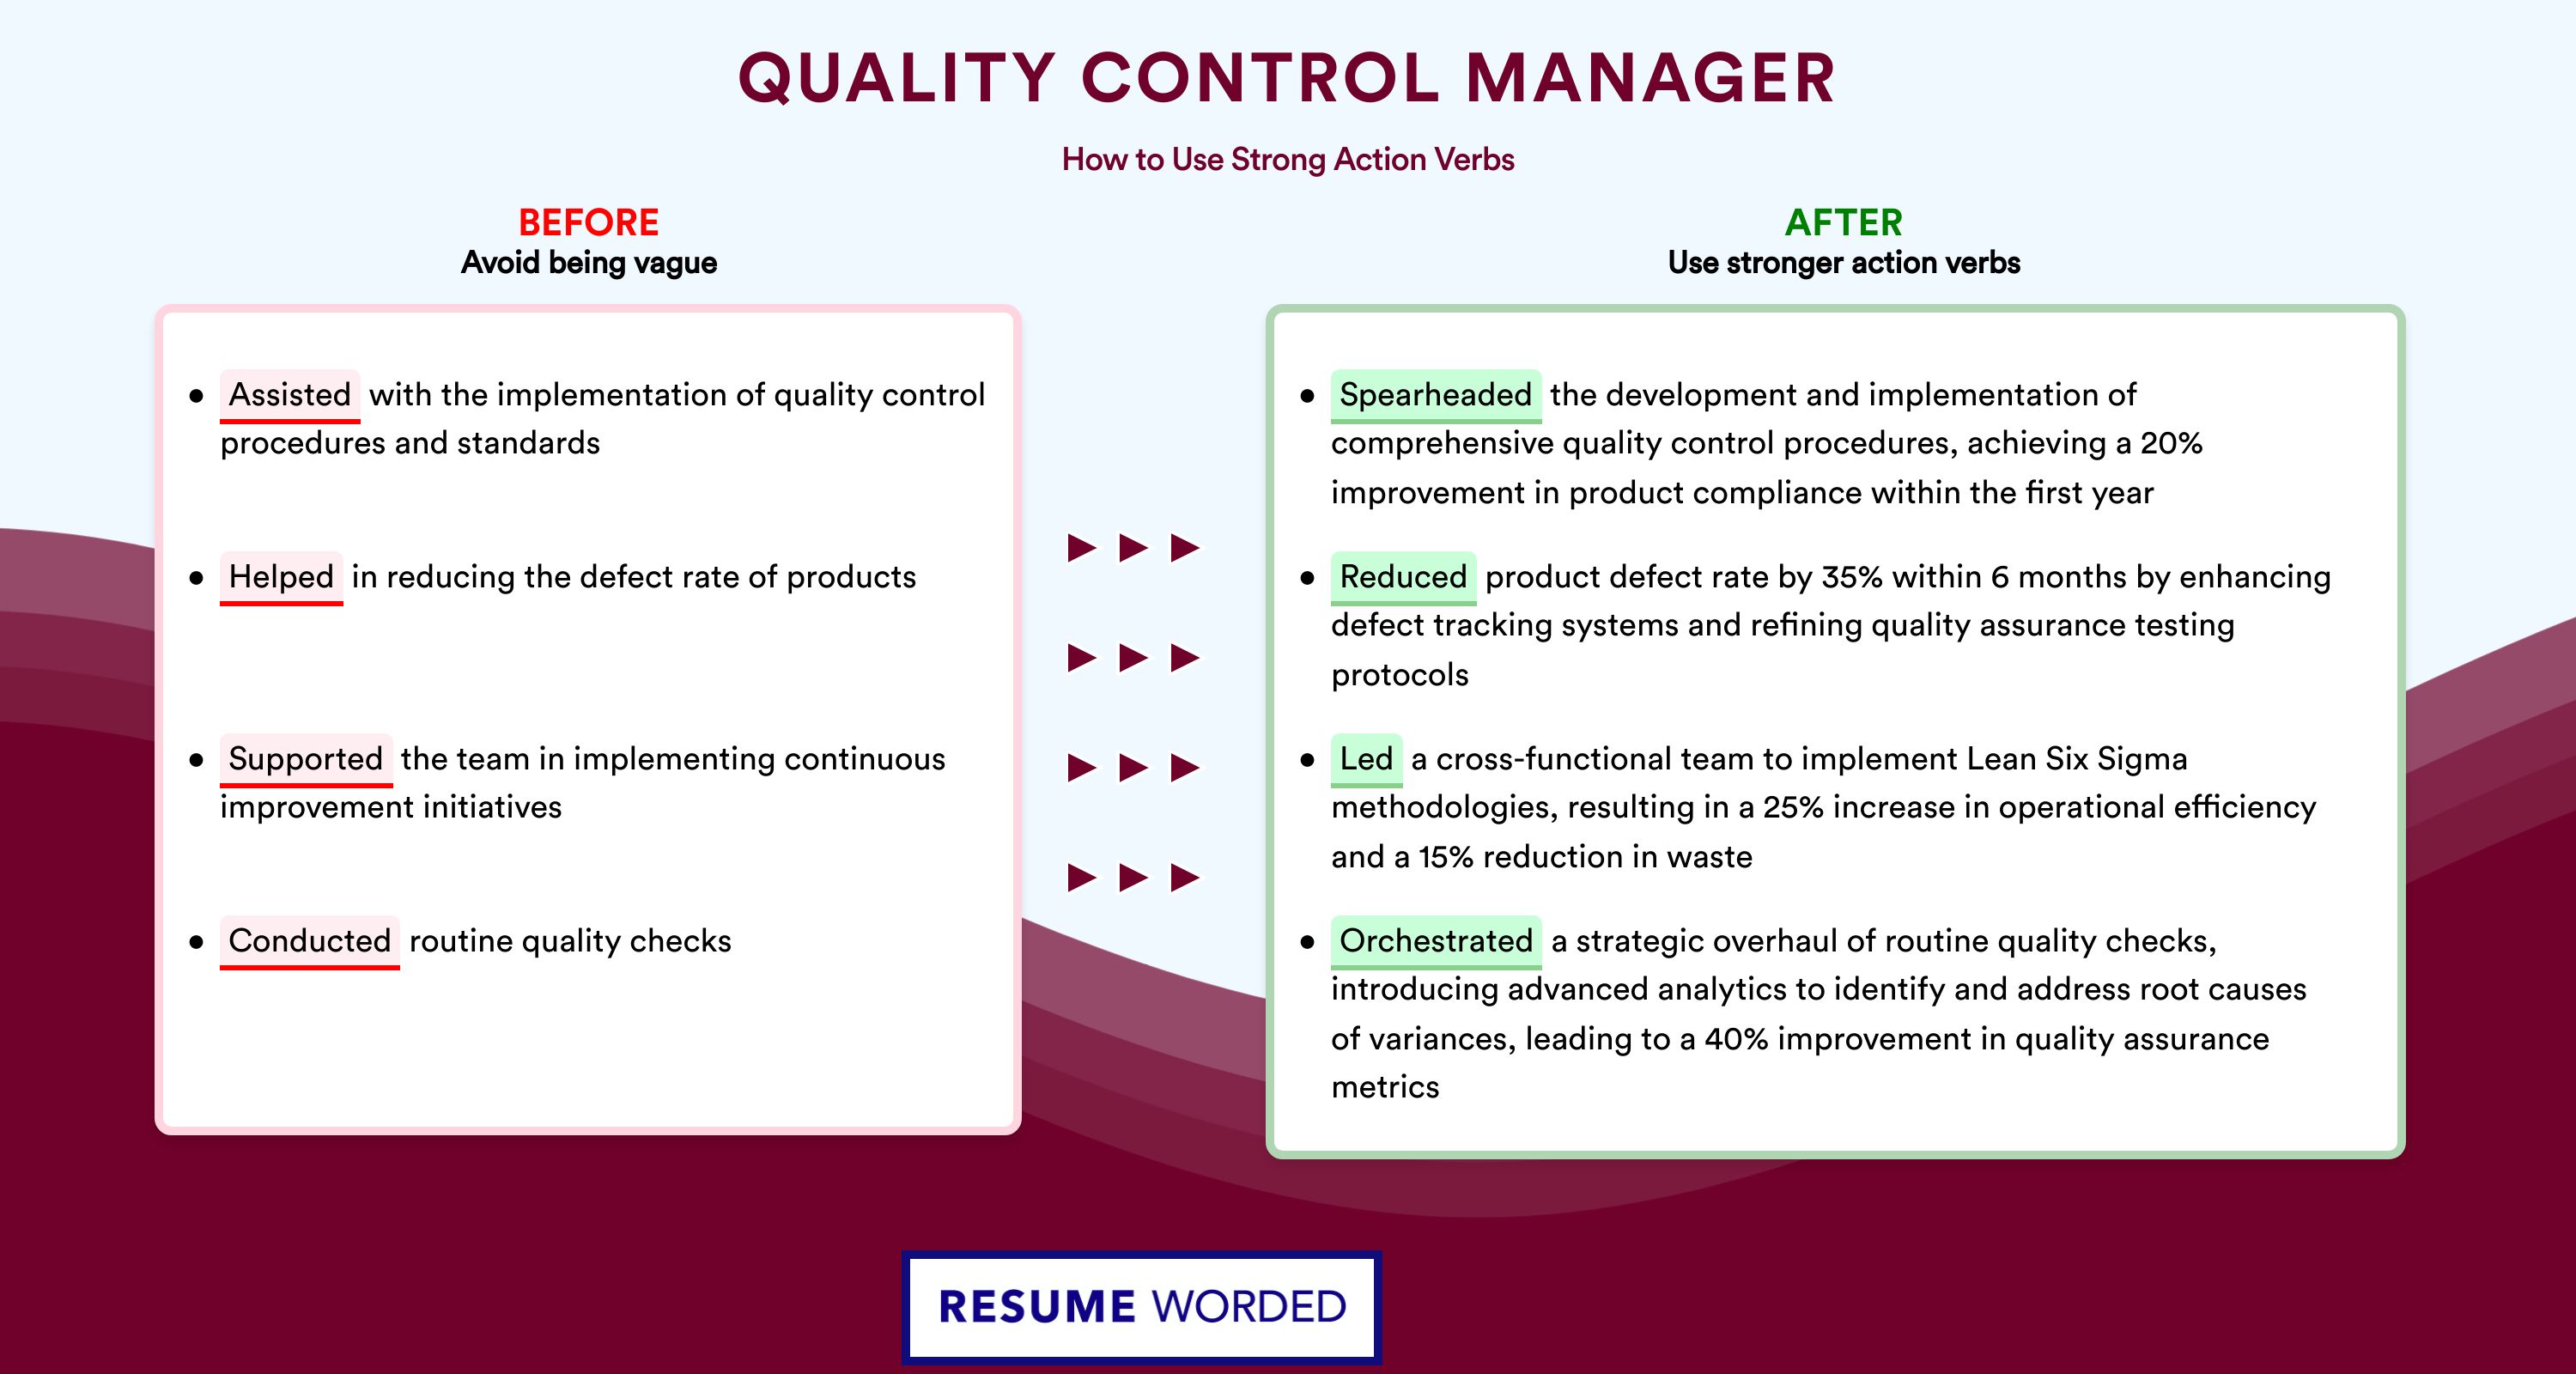 Action Verbs for Quality Control Manager